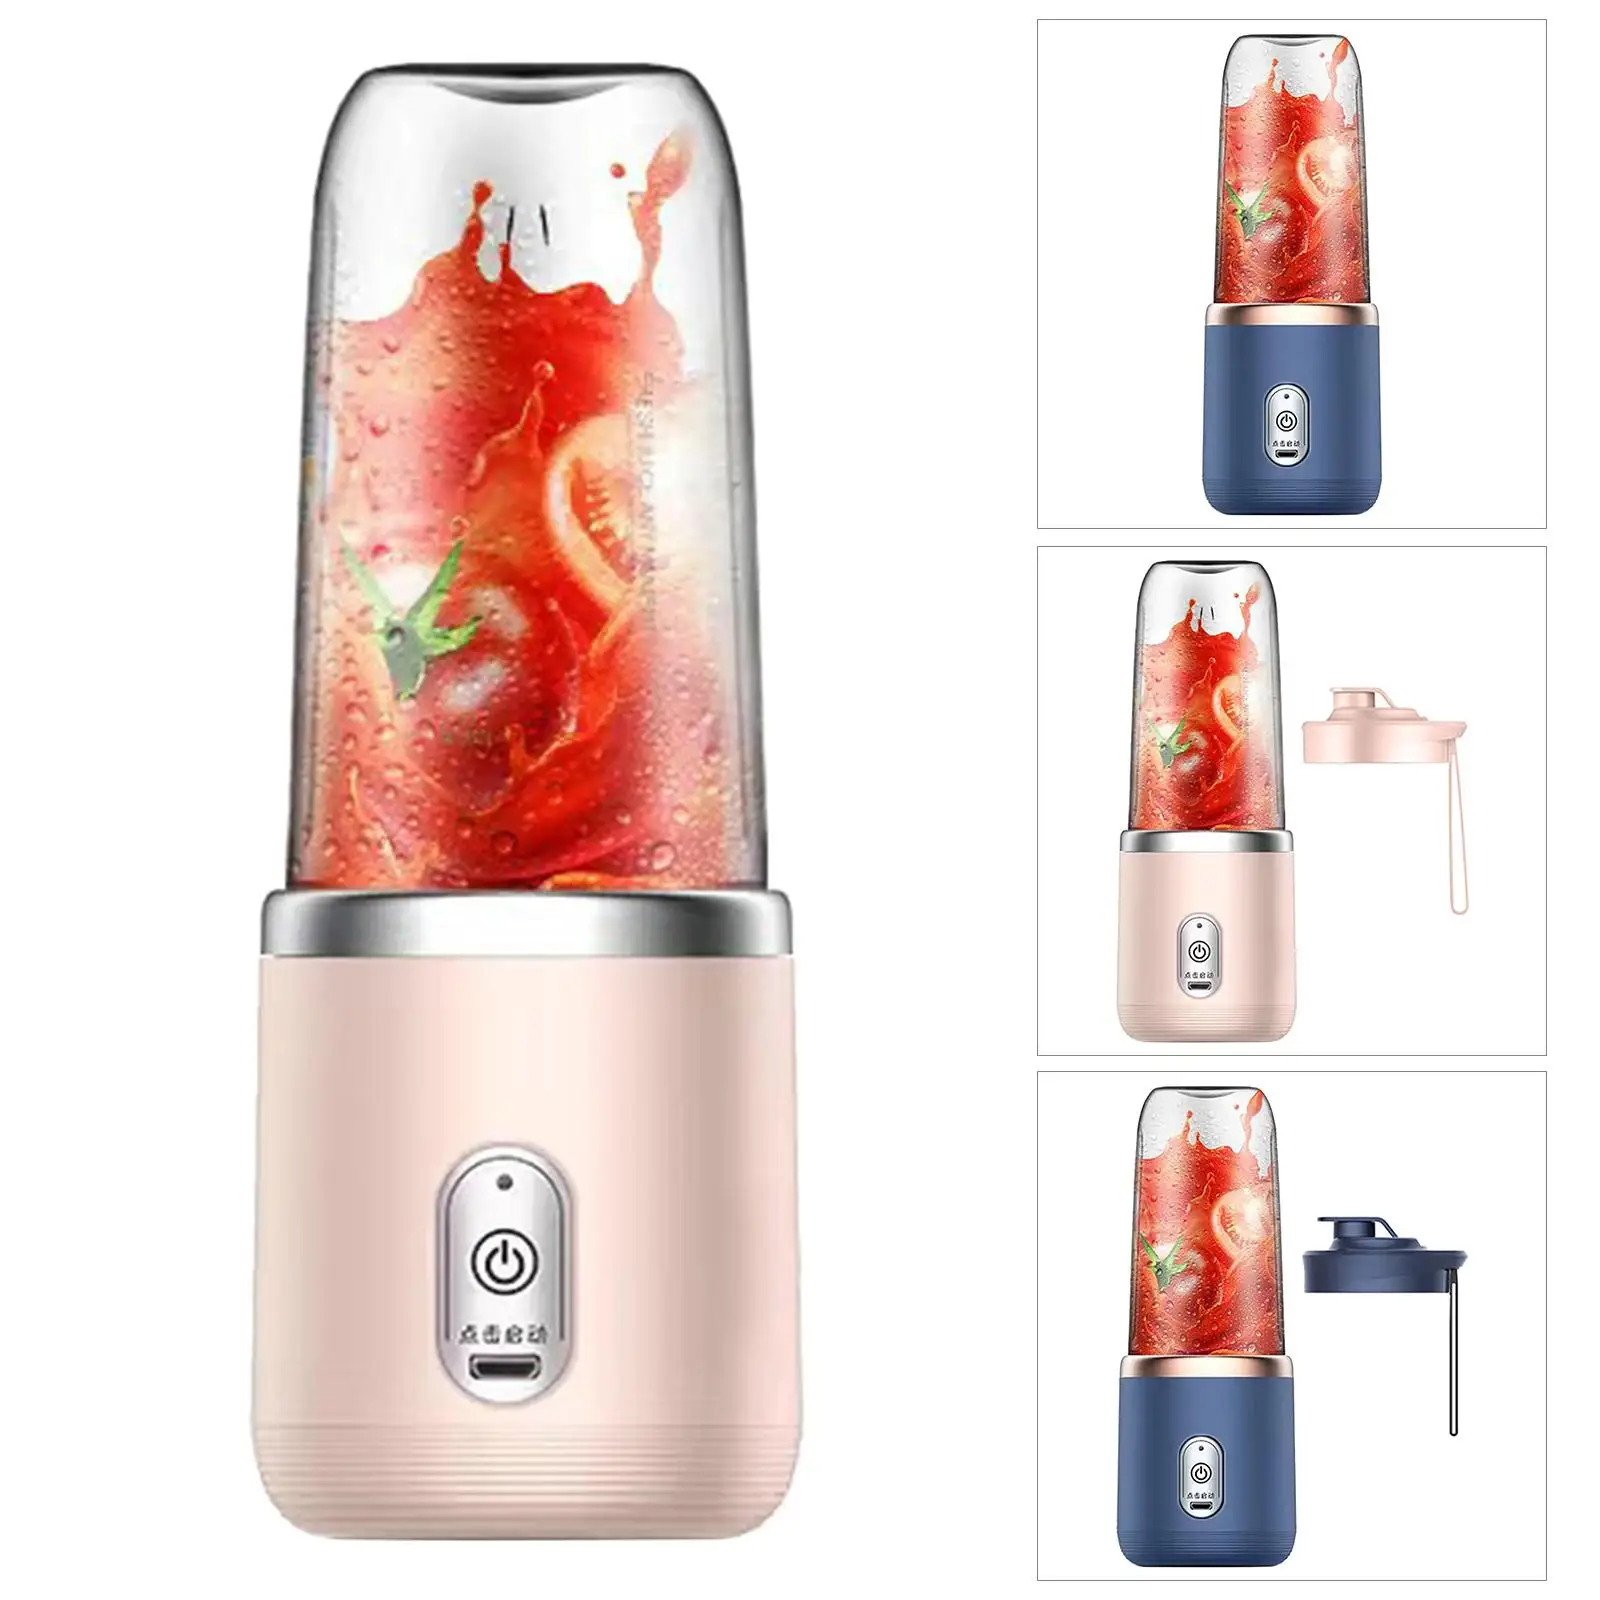 6 Blades Mini Juicer Cup Extr tor Smoothies Mixer Food Mixer Electric Portable Blender for Shakes Powerful Motor Fruit M hine